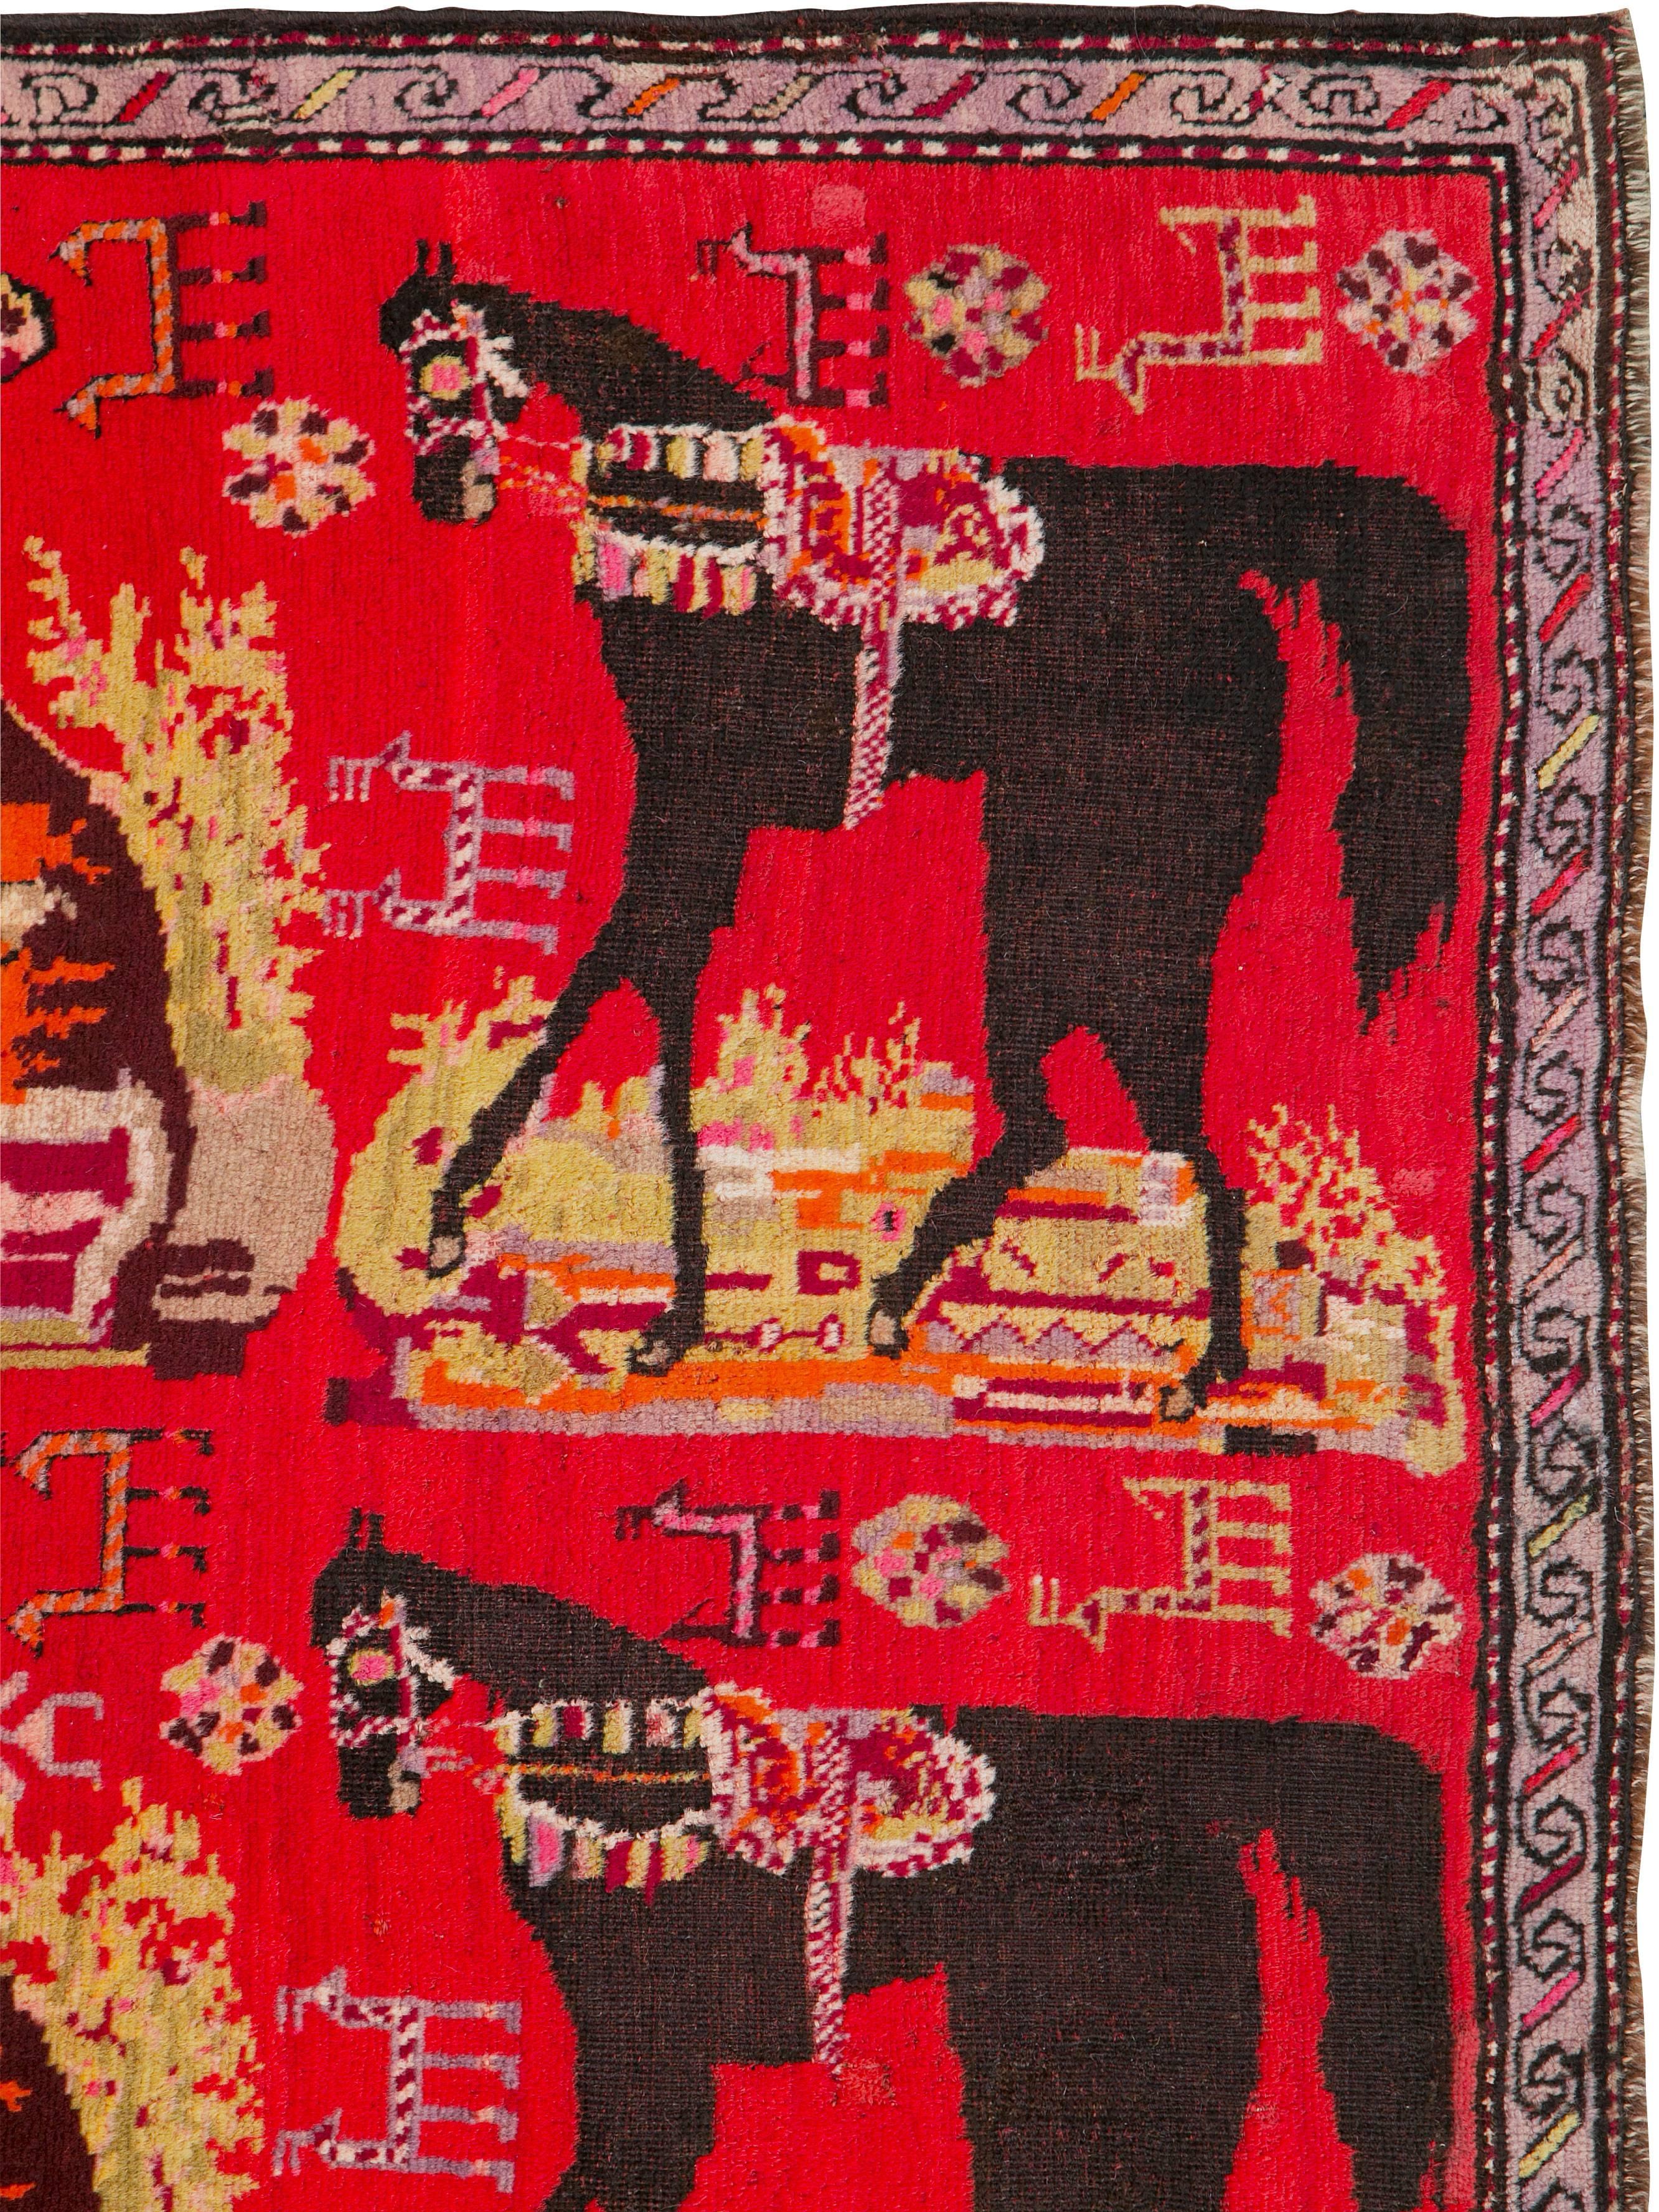 An early 20th century pictorial Karabagh rug.